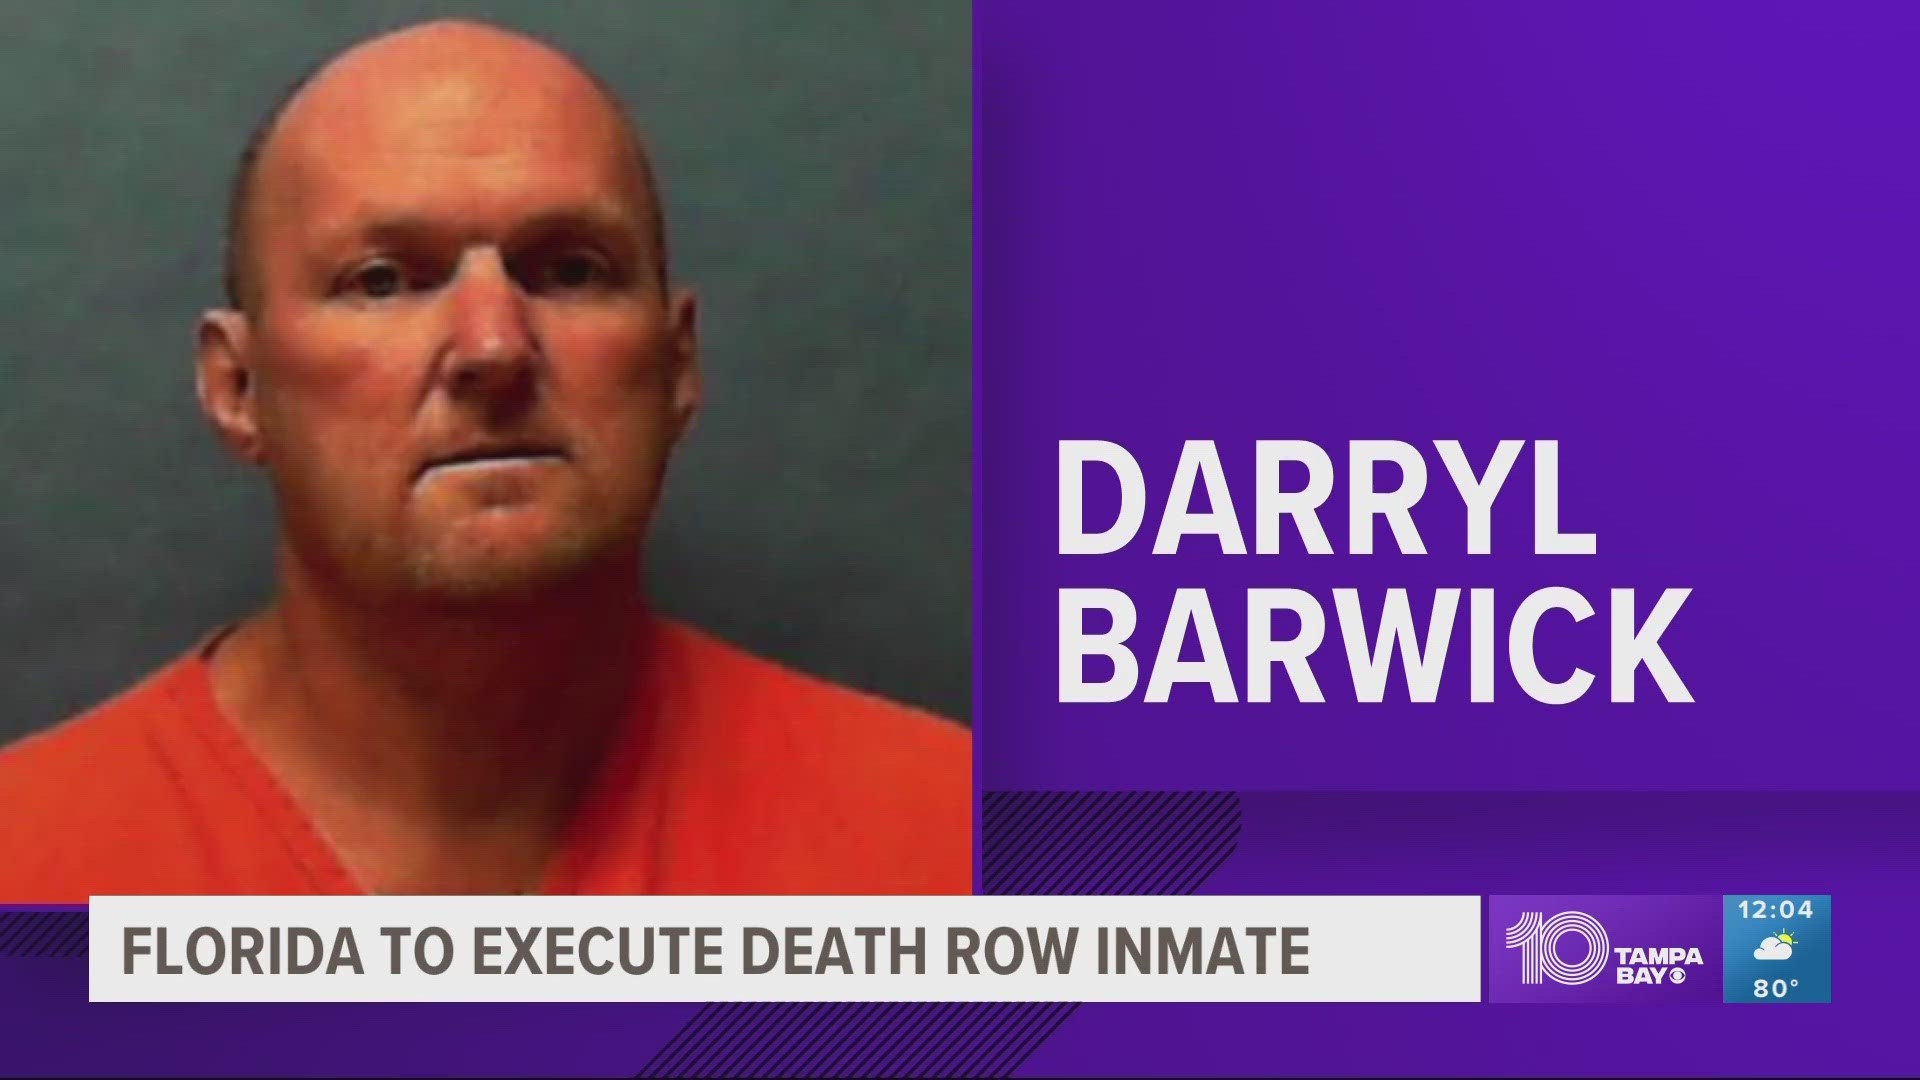 Darryl B. Barwick, 56, is set to be executed at 6 p.m. at Florida State Prison in Starke.